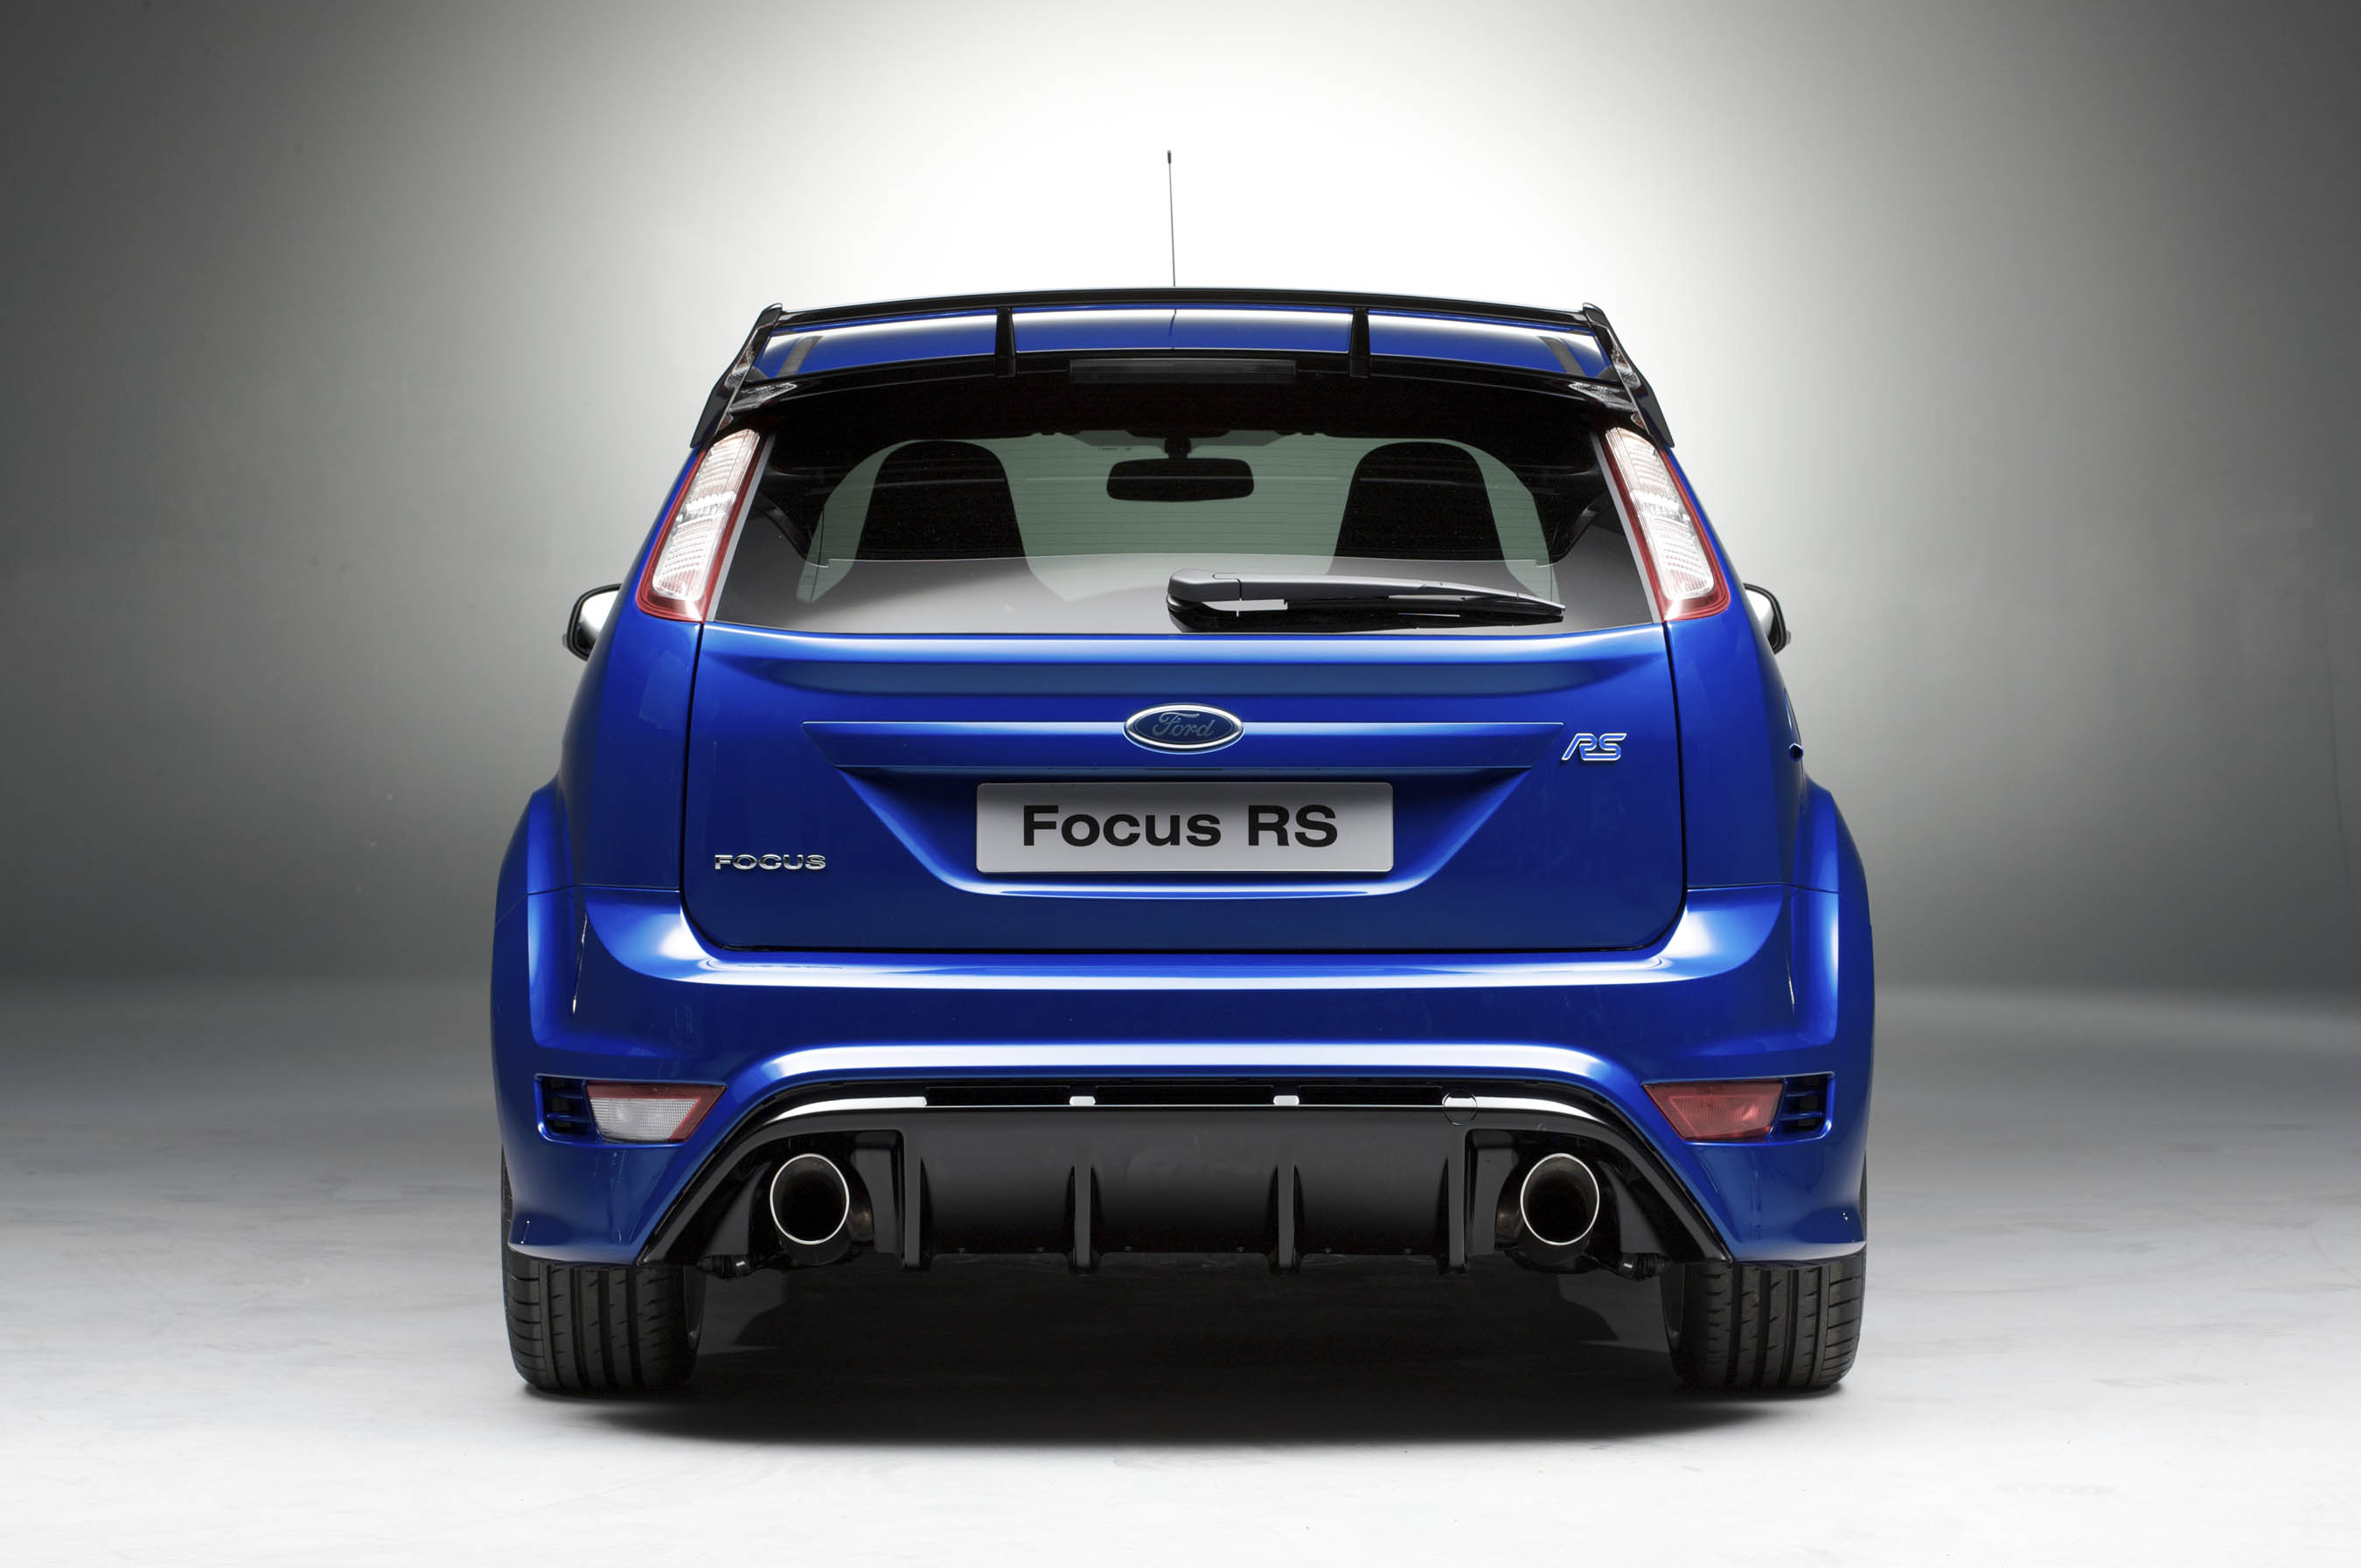 2008 Ford focus rs price #5